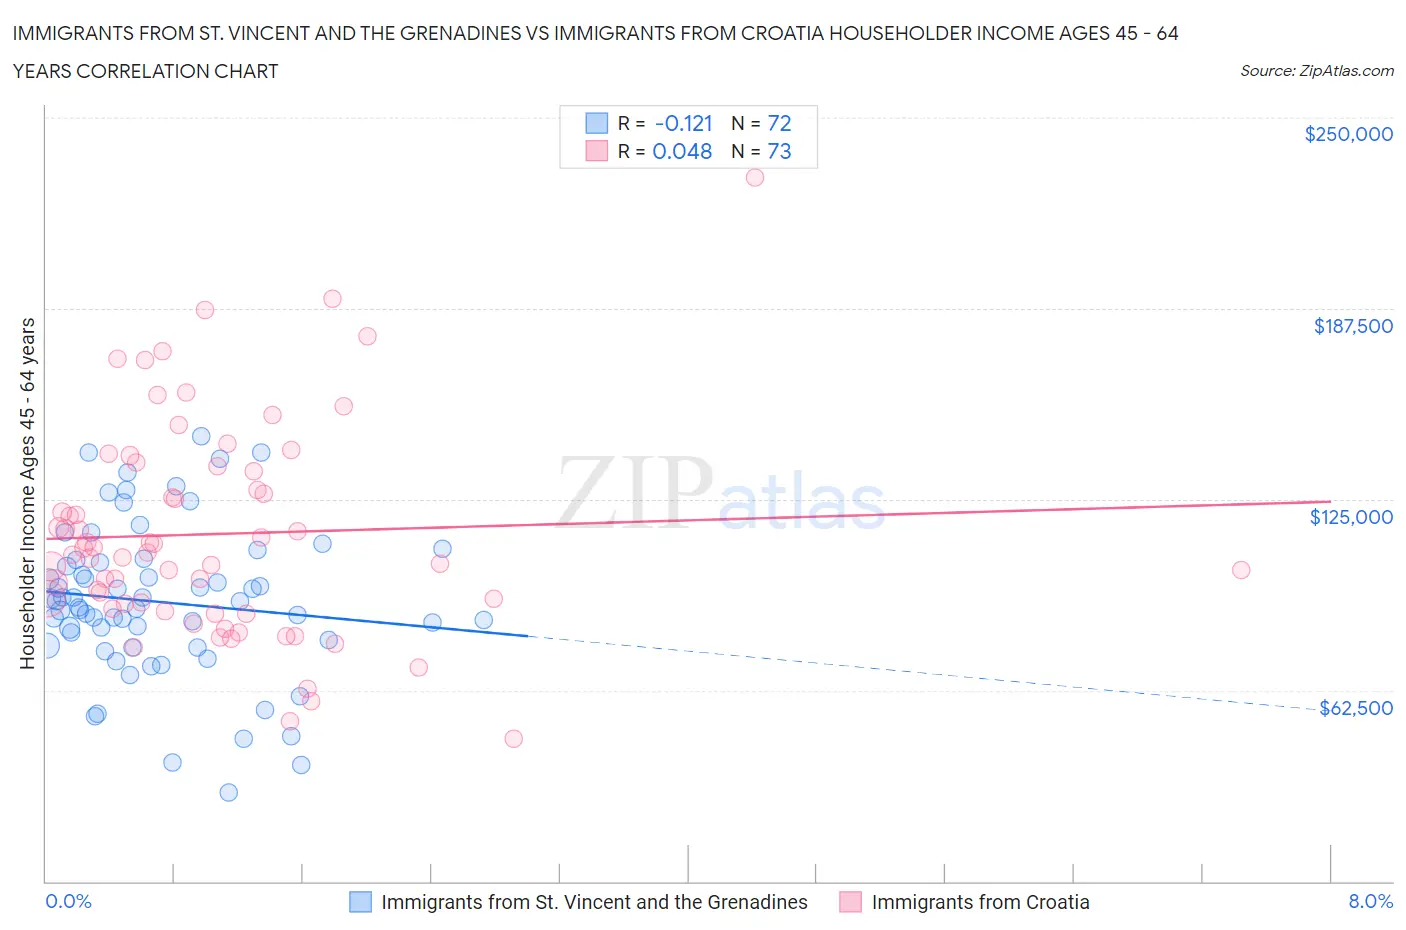 Immigrants from St. Vincent and the Grenadines vs Immigrants from Croatia Householder Income Ages 45 - 64 years